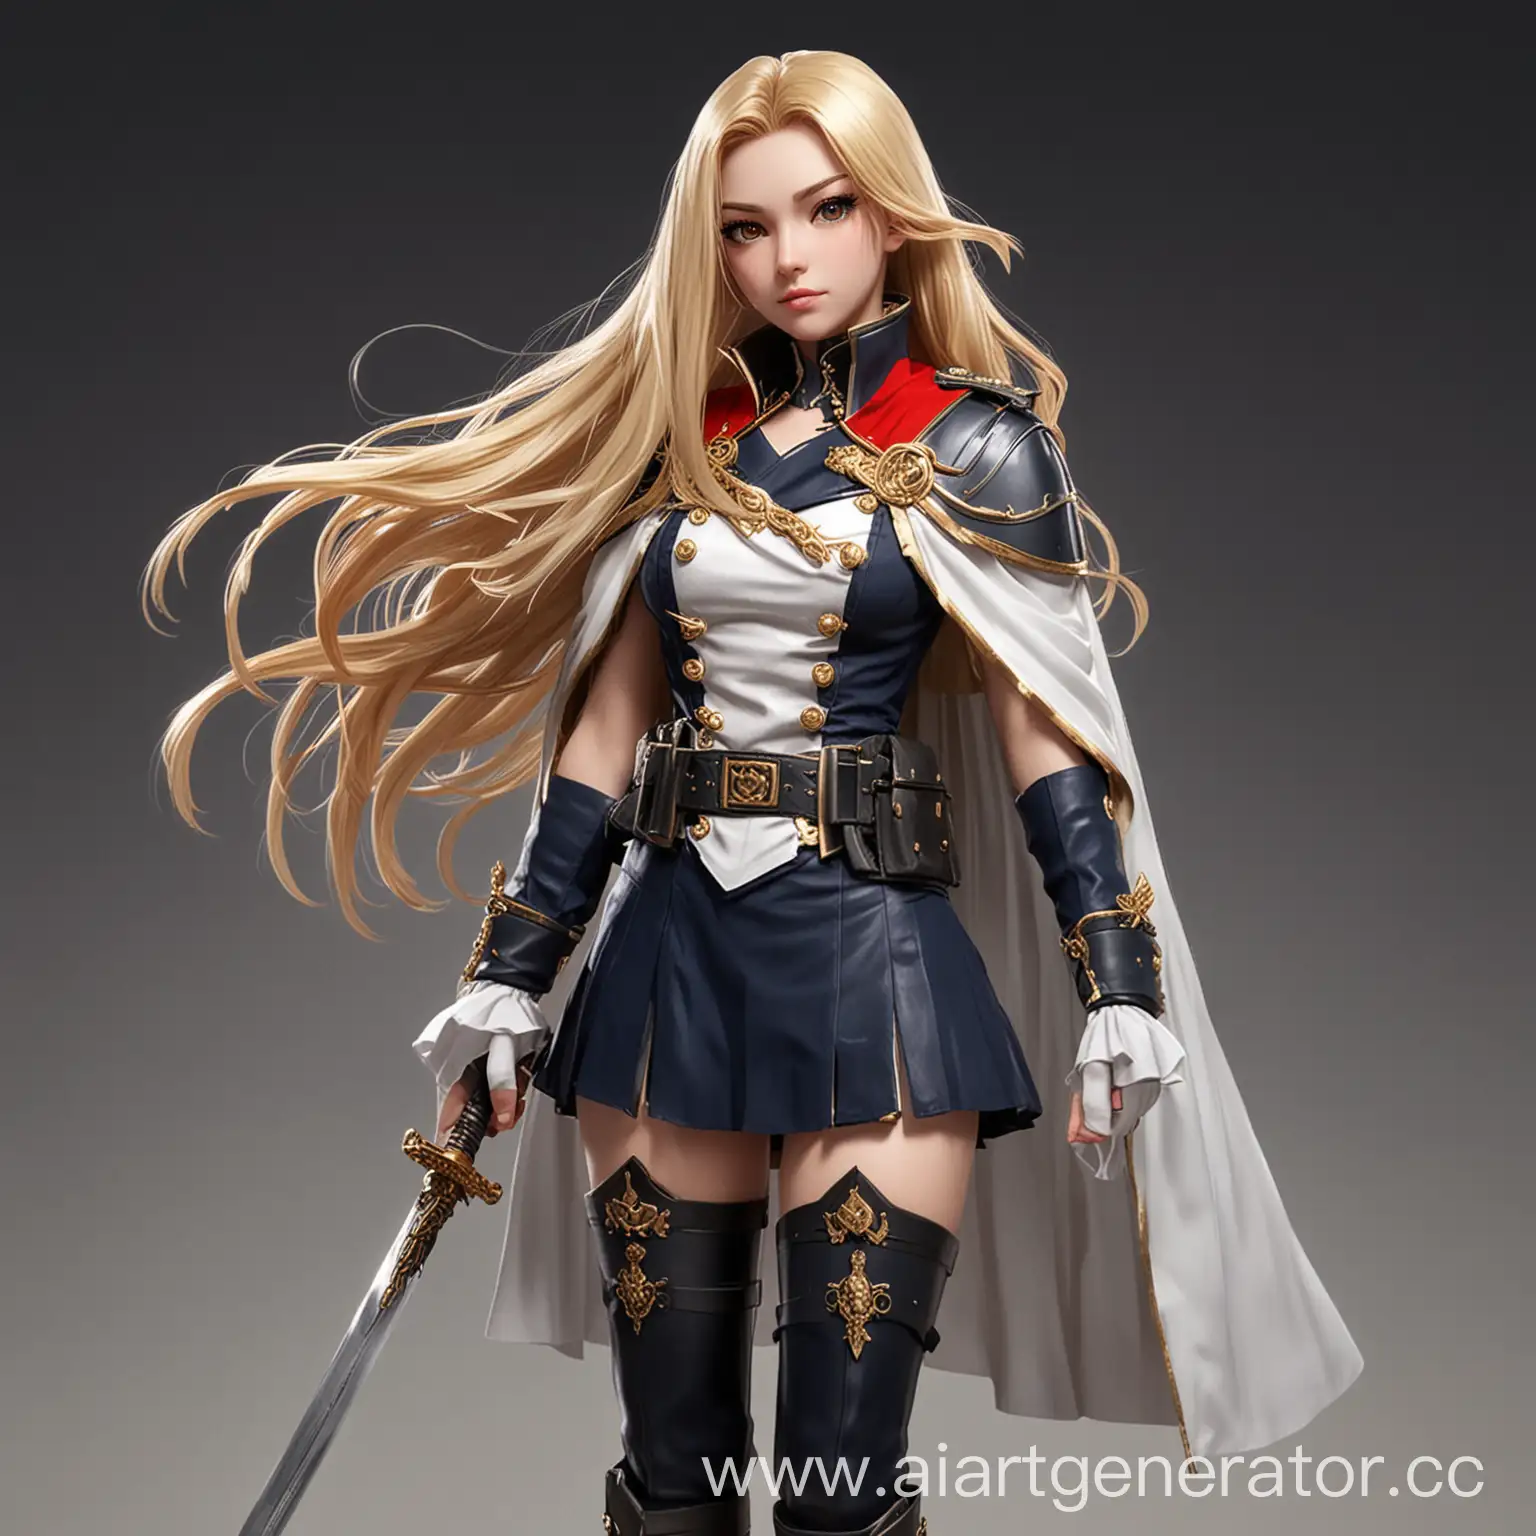 Anime-style character with long blonde hair, wearing a navy military-inspired outfit with gold trim, a white cape, and black thigh-high boots. The character has a serious expression, with a red accessory near their ear, and is holding a sword by their side. The background is a dark gradient fading to light at the bottom.